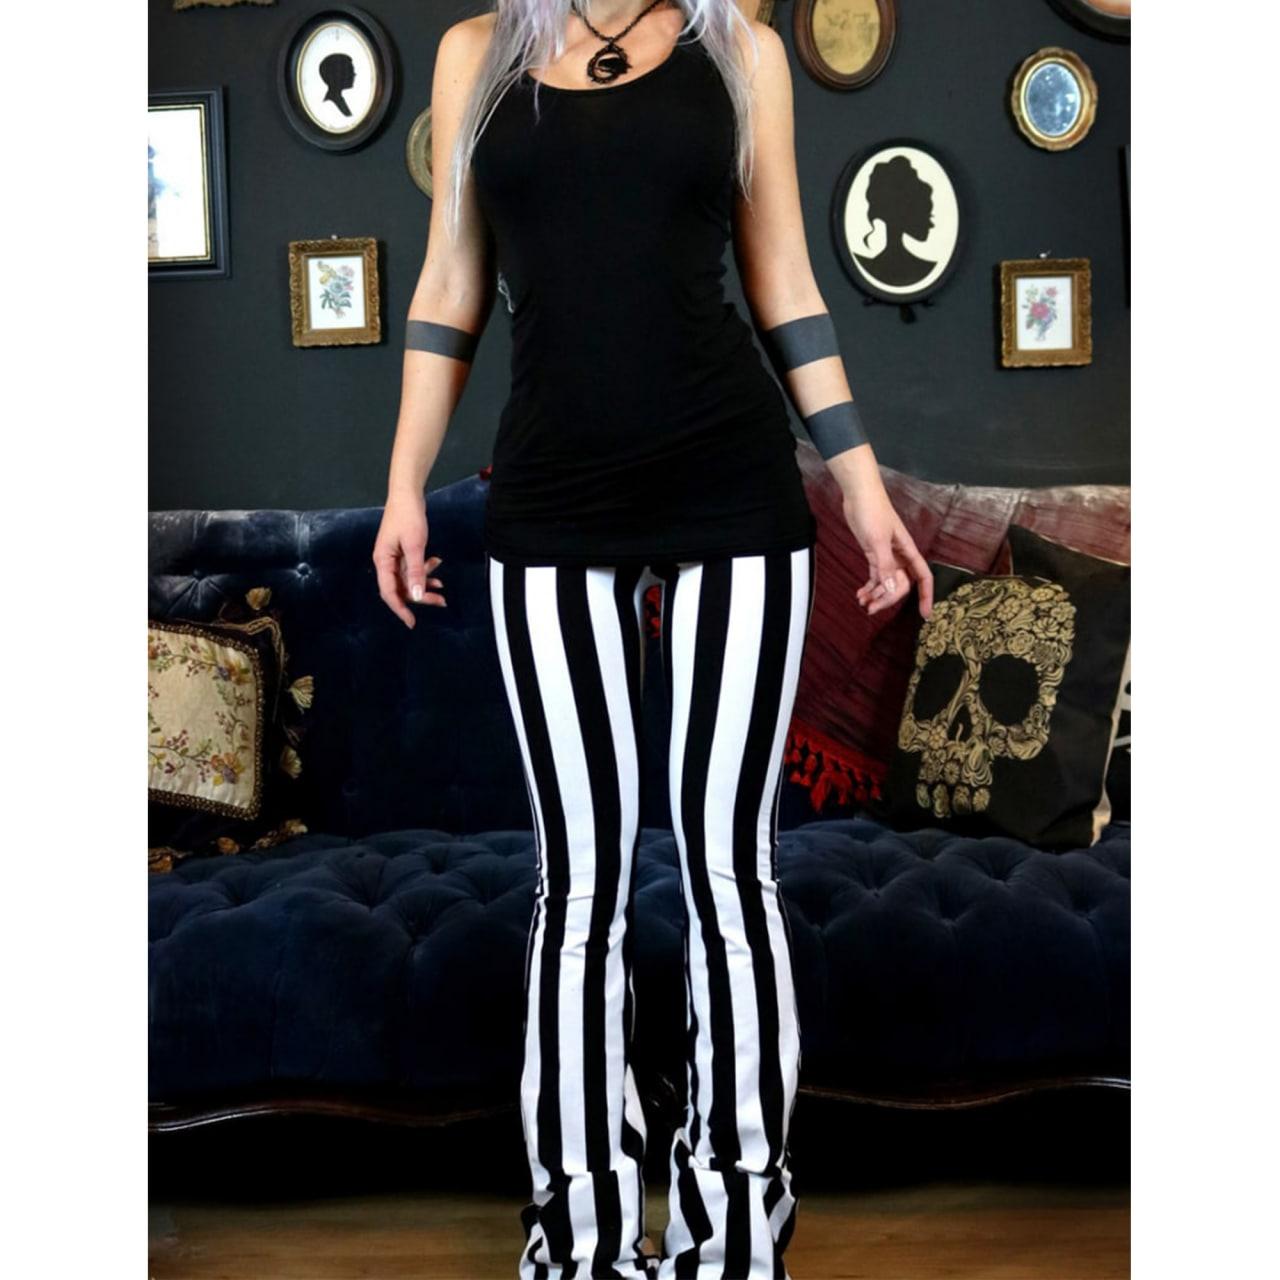 Gothic Vertical Striped Loose Trousers, Attractive High Waist Wide Leg Pants For Women - Wonder Skull